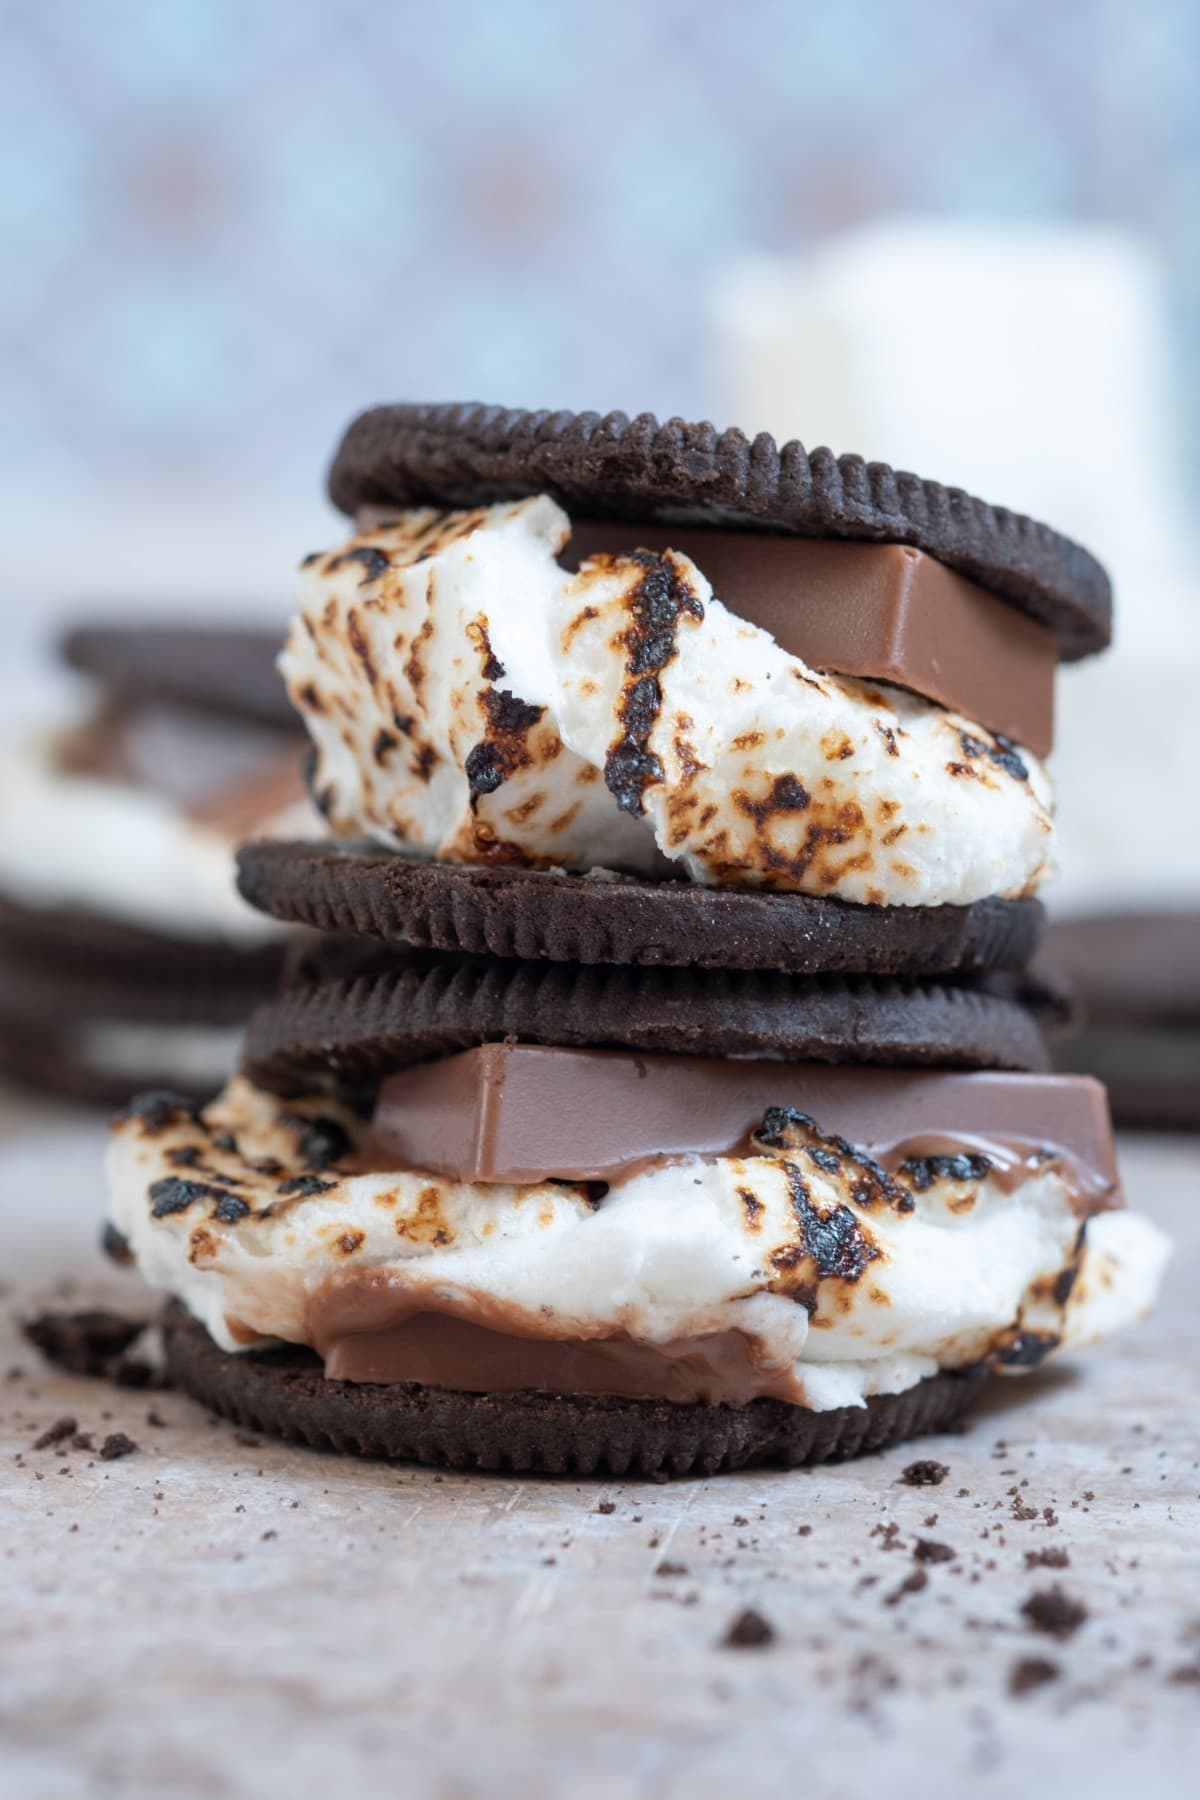 Oreo Smores with Hershey's chocolate and marshmallow